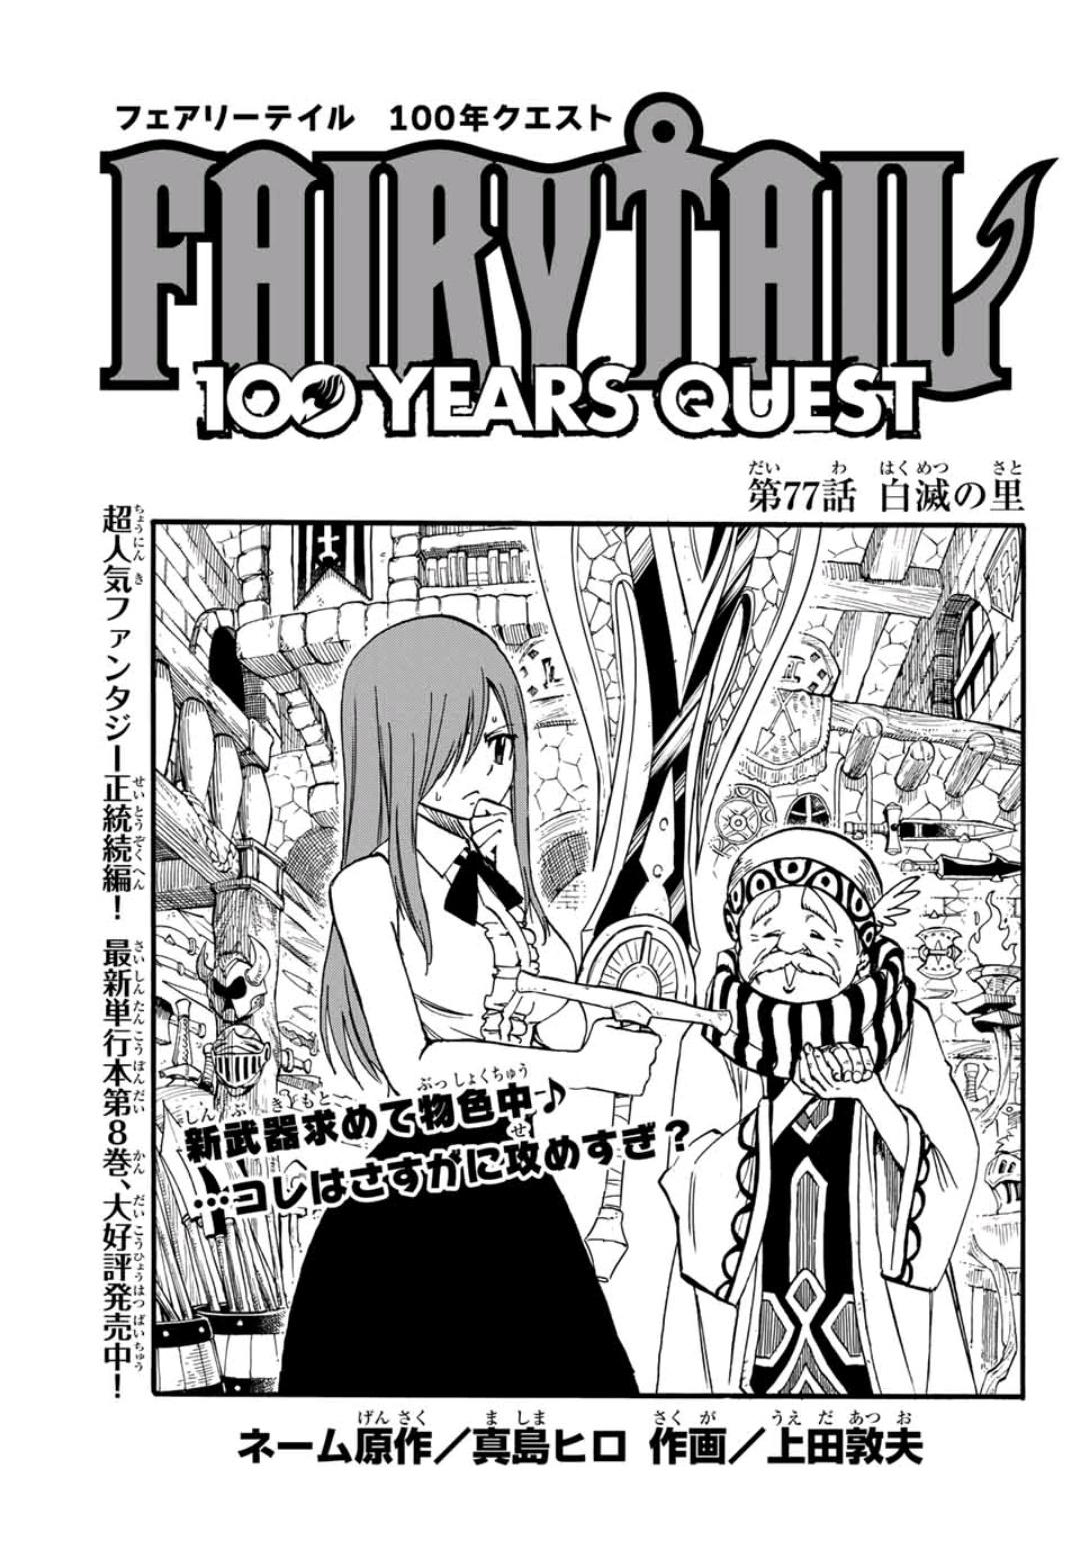 Fairy Tail: 100 Years Quest Anime - Everything You Should Know - Cultured  Vultures